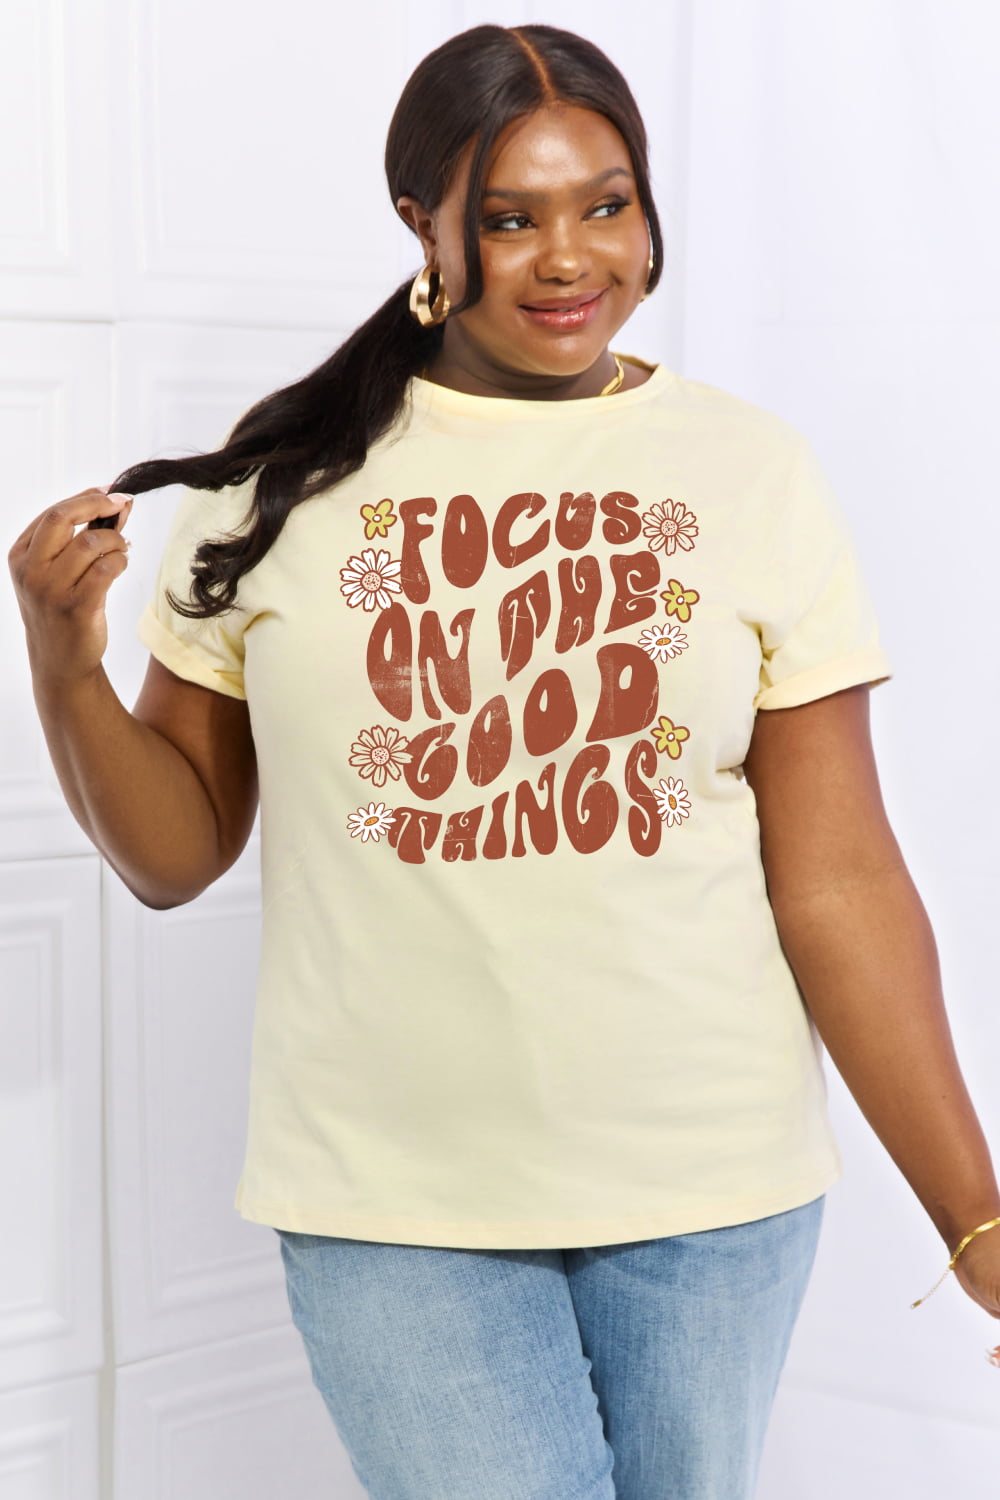 FOCUS ON THE GOOD THINGS Graphic Cotton Tee - T-Shirts - Shirts & Tops - 11 - 2024